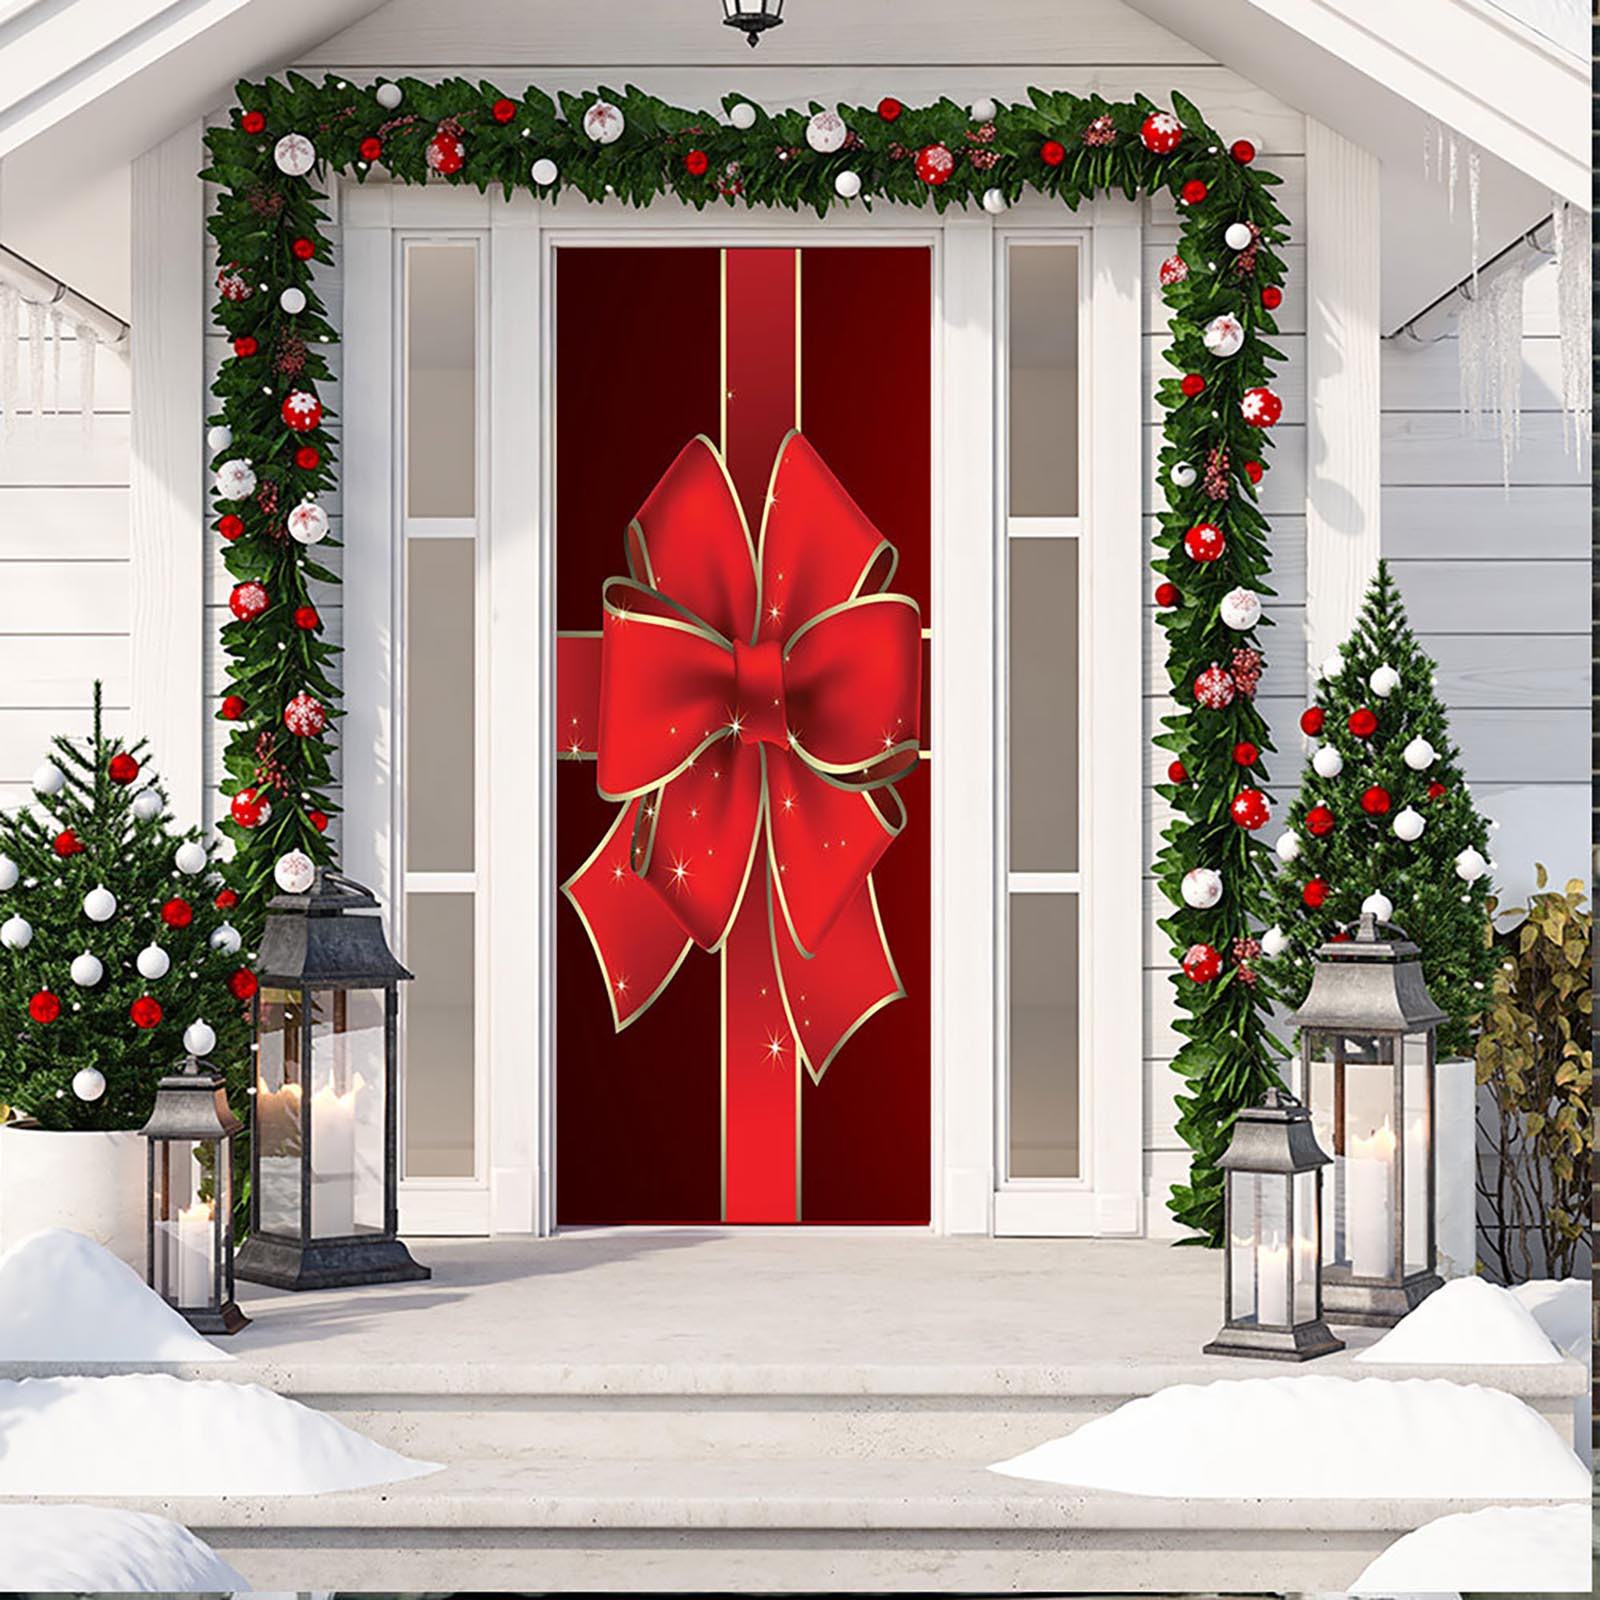 Baocc christmas decorations 3D Christmas Door Covers Christmas Party ...